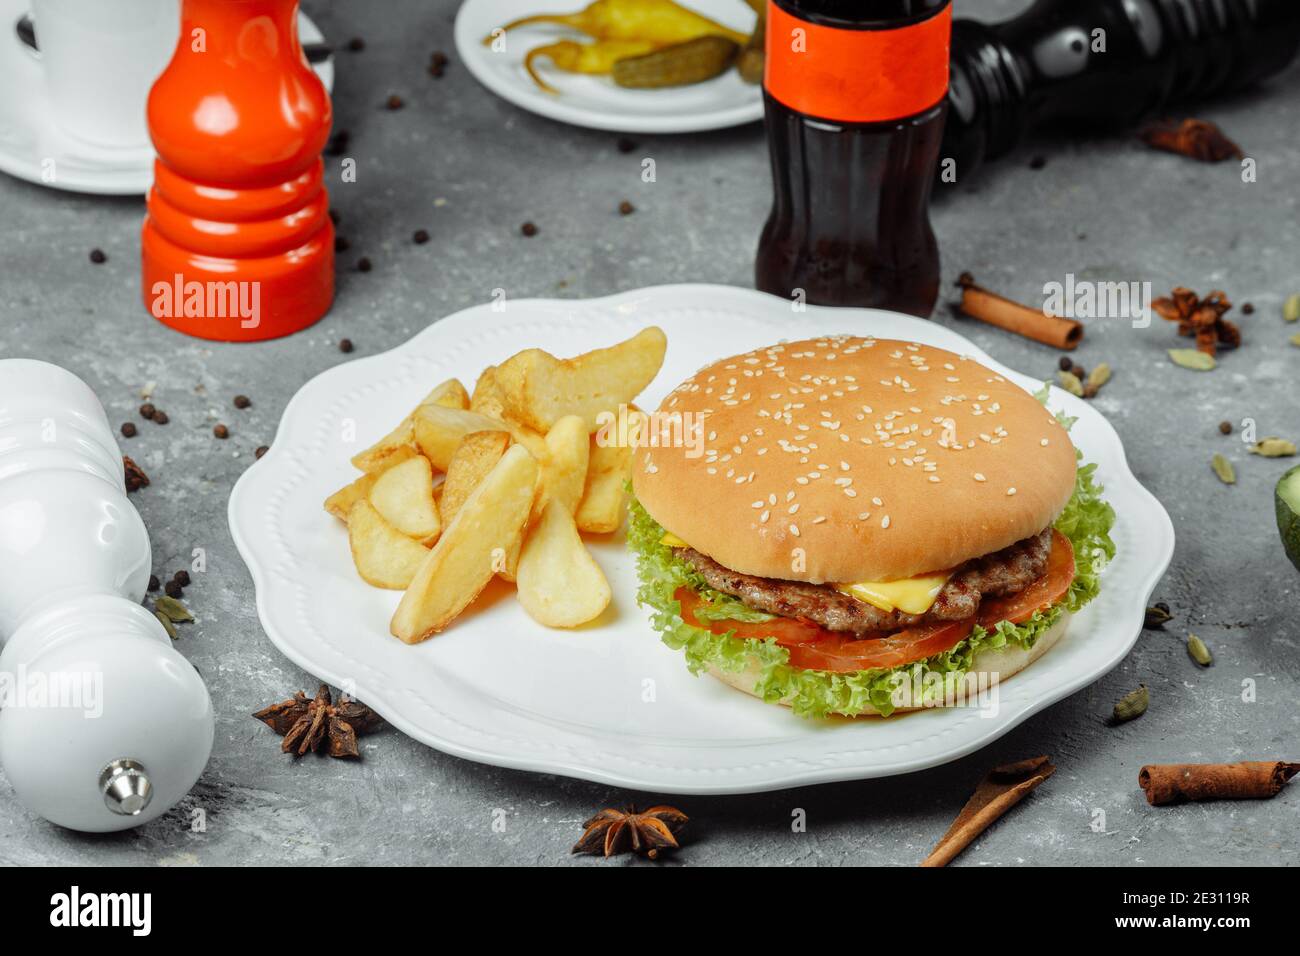 hamburger with fries and salad on the plate Stock Photo